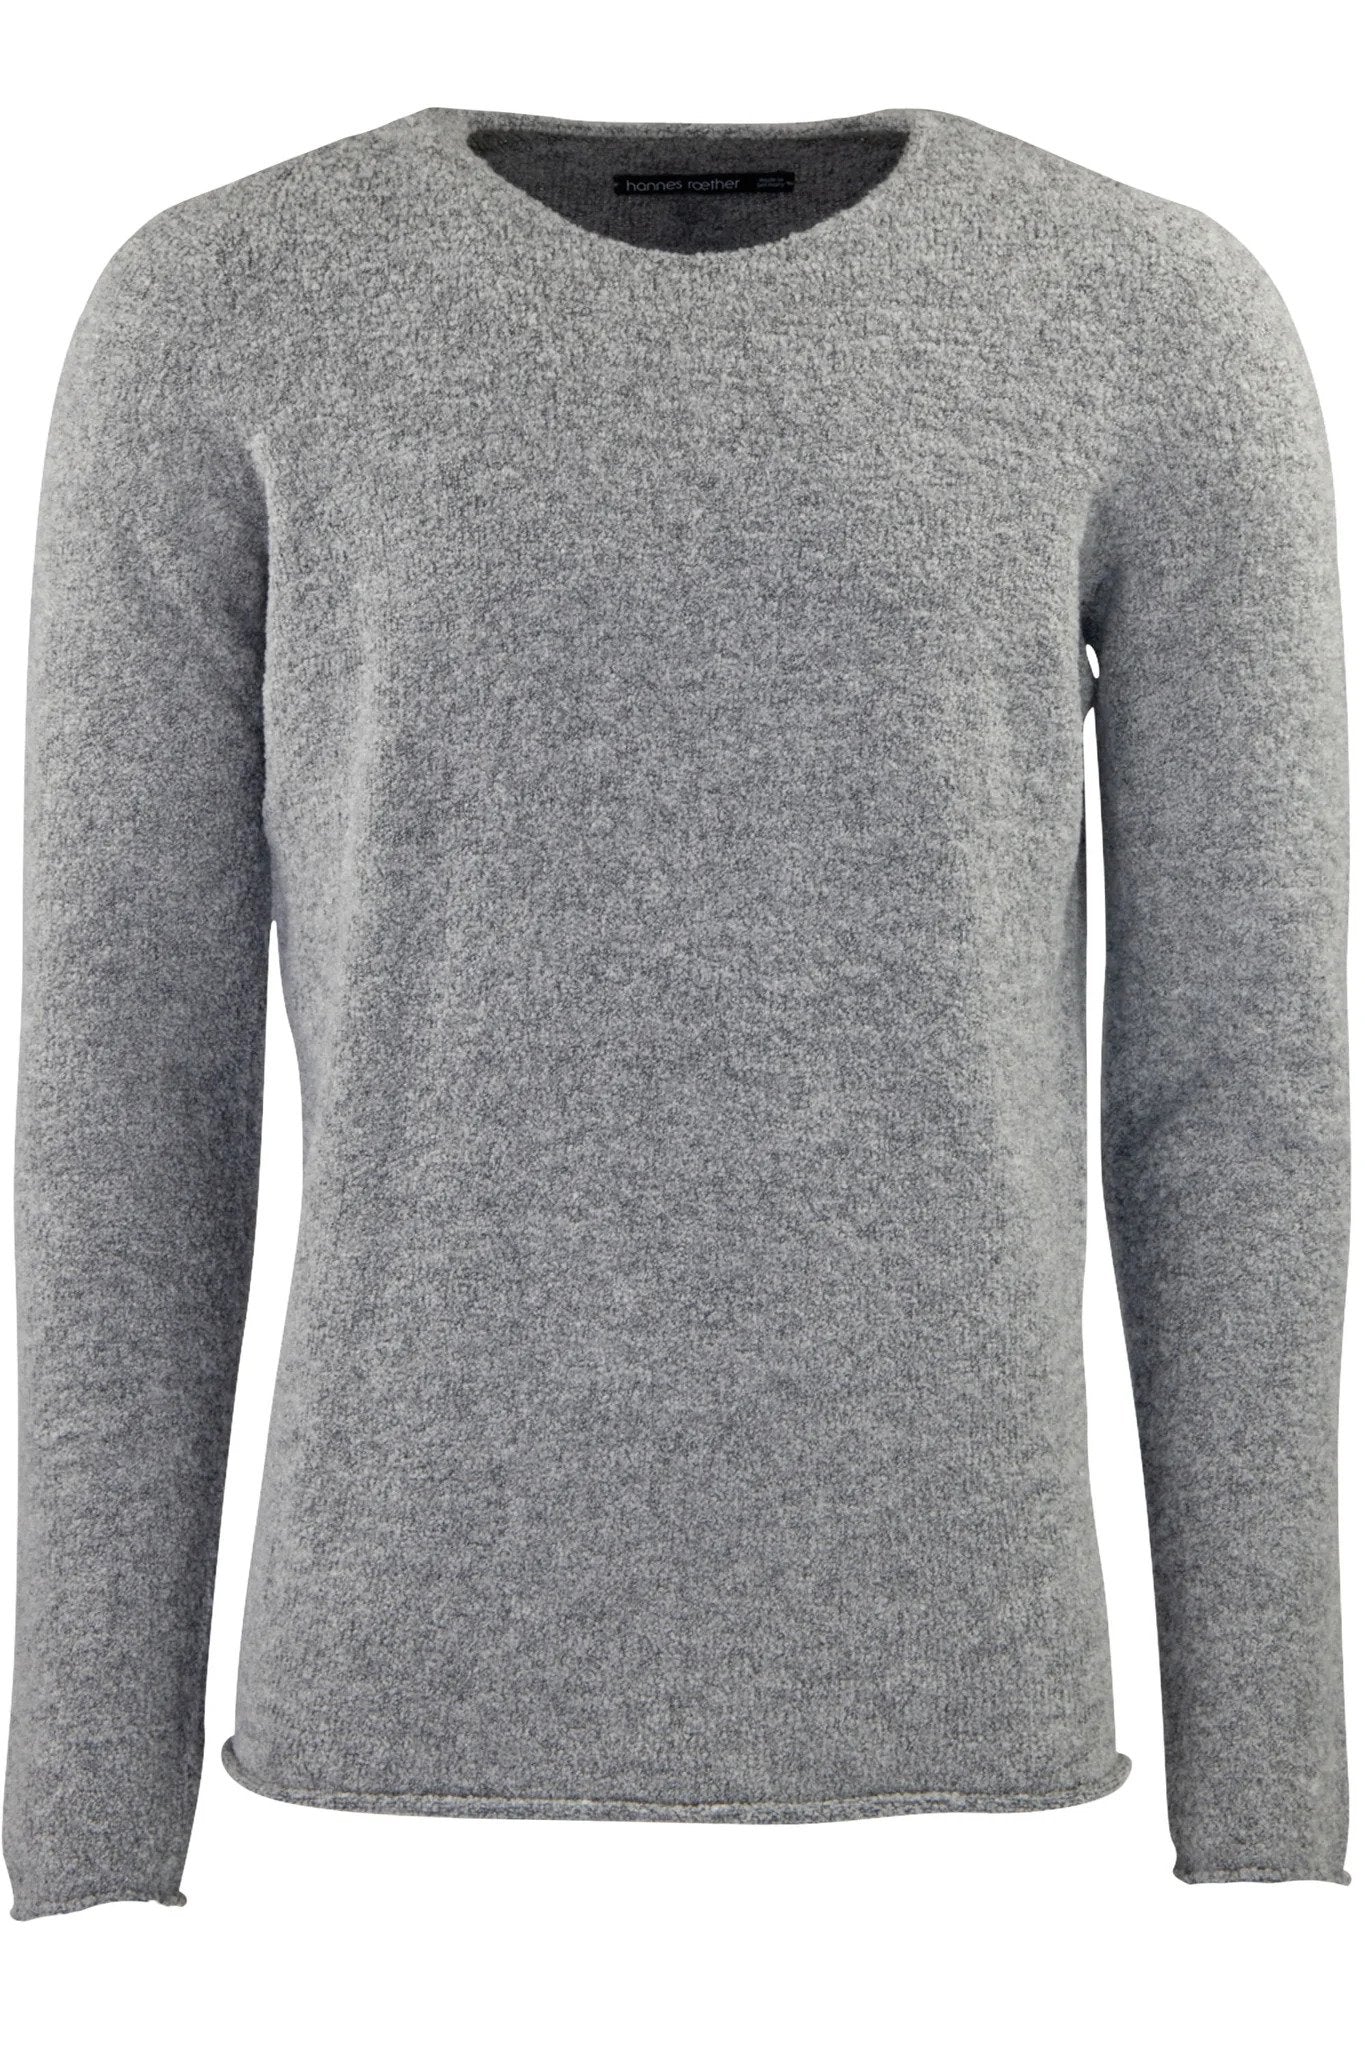 
                  
                    HANNES ROETHER MALE SWEATER 110349 so10ber.174.101 55%MWO26%CO16%PL3%KA 120 CHIC
                  
                